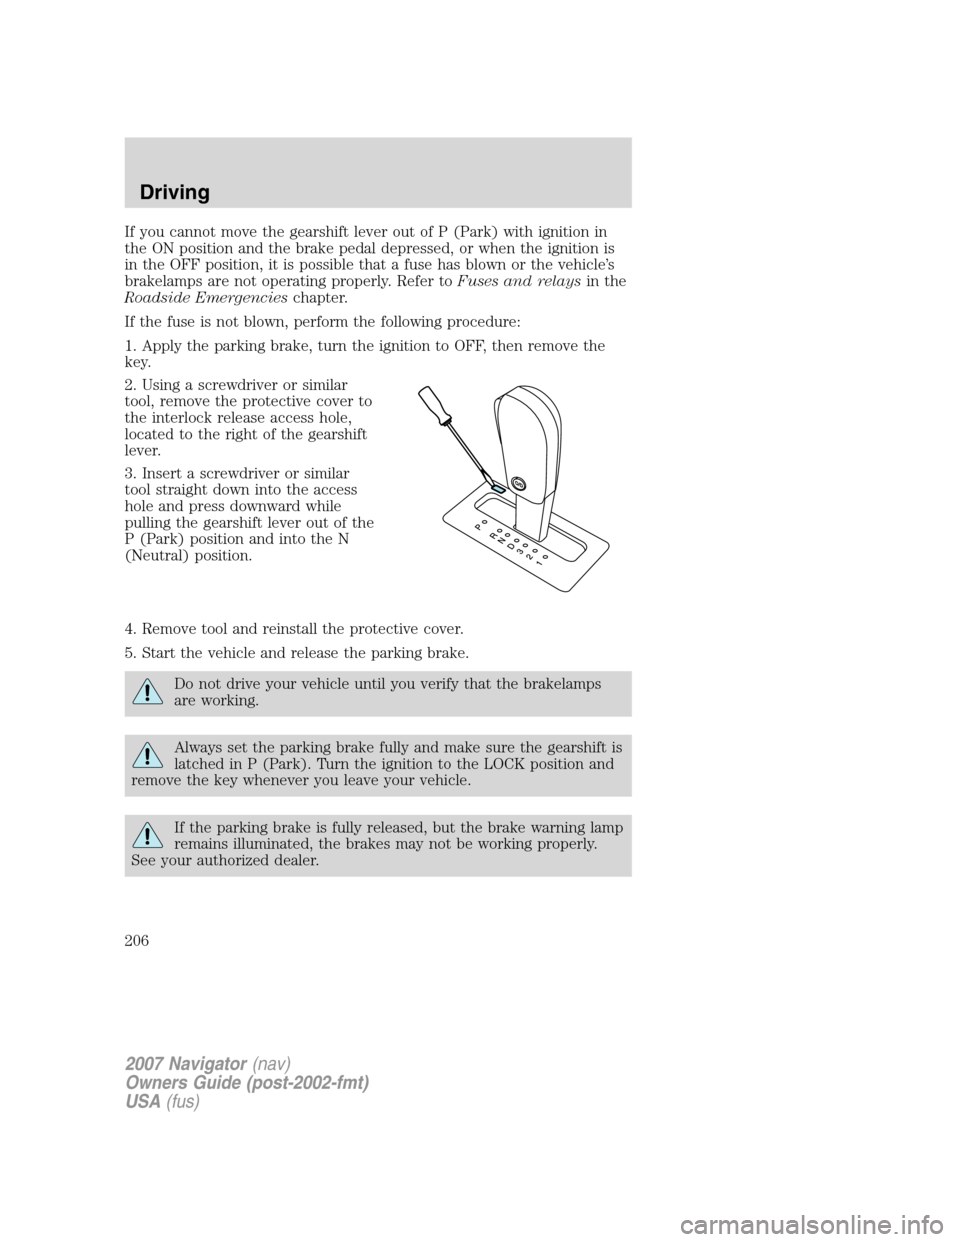 LINCOLN NAVIGATOR 2007  Owners Manual If you cannot move the gearshift lever out of P (Park) with ignition in
the ON position and the brake pedal depressed, or when the ignition is
in the OFF position, it is possible that a fuse has blown